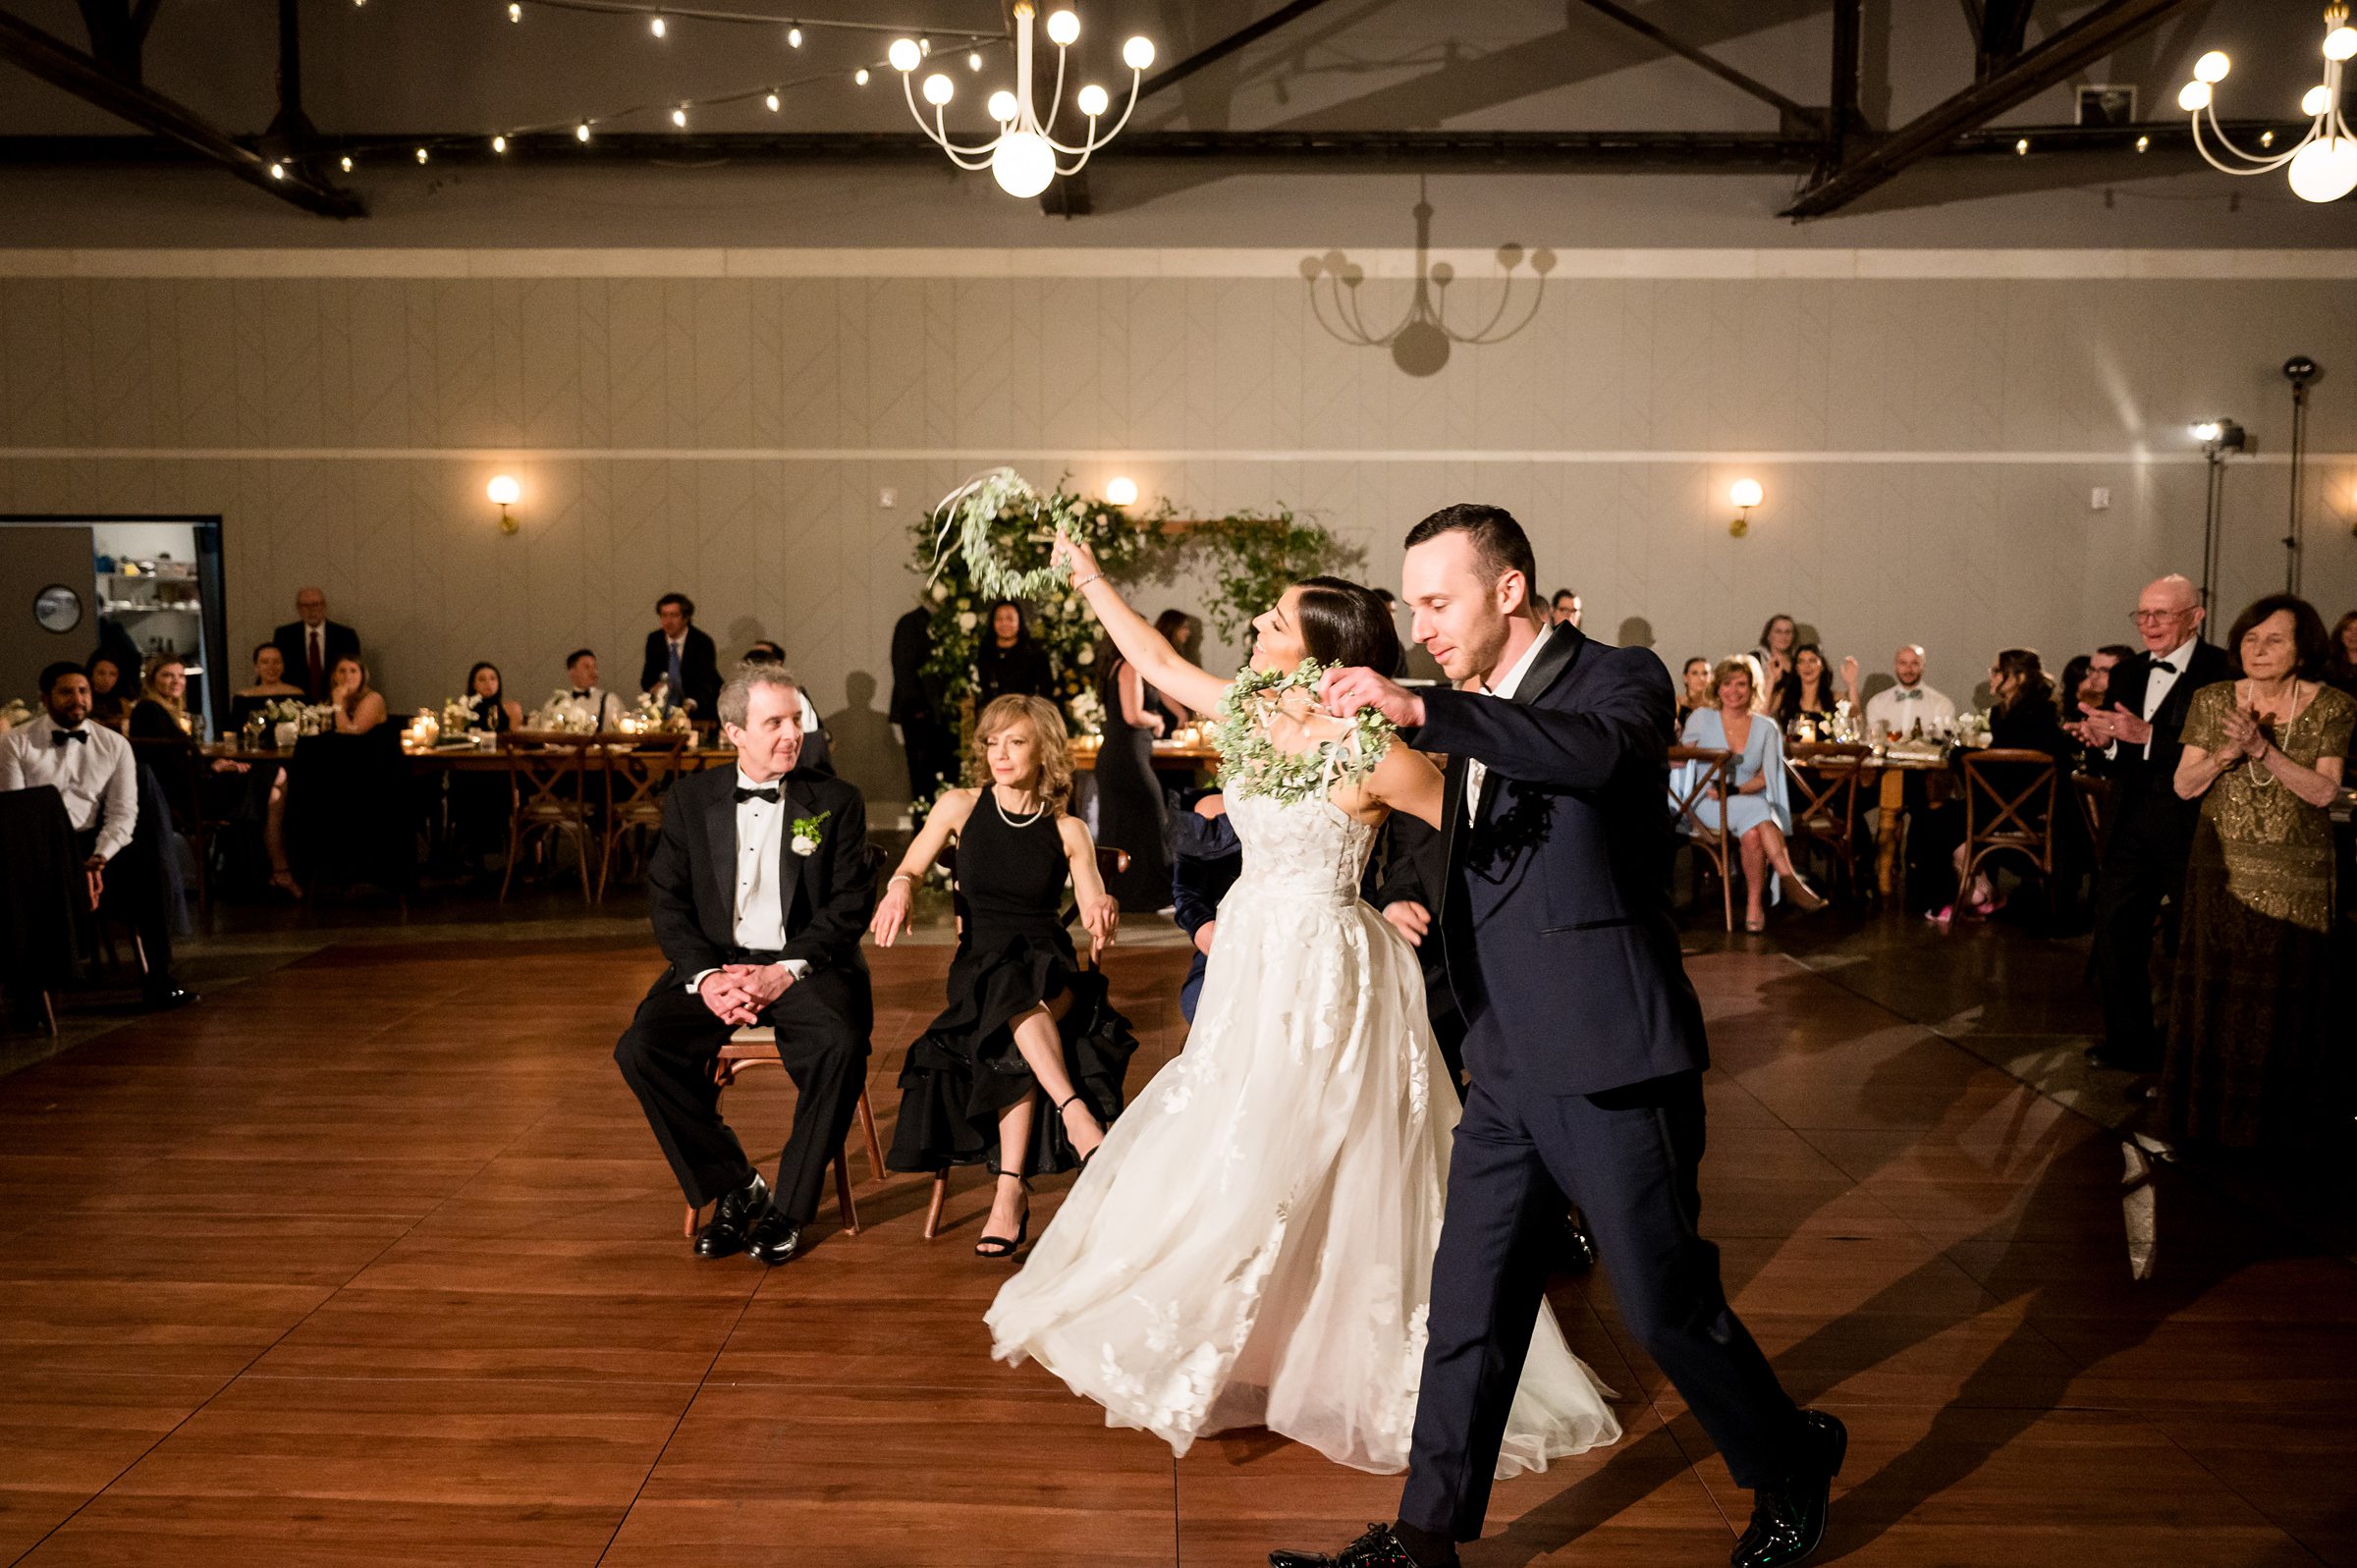 A bride and groom dancing at their Lilah Events wedding reception.